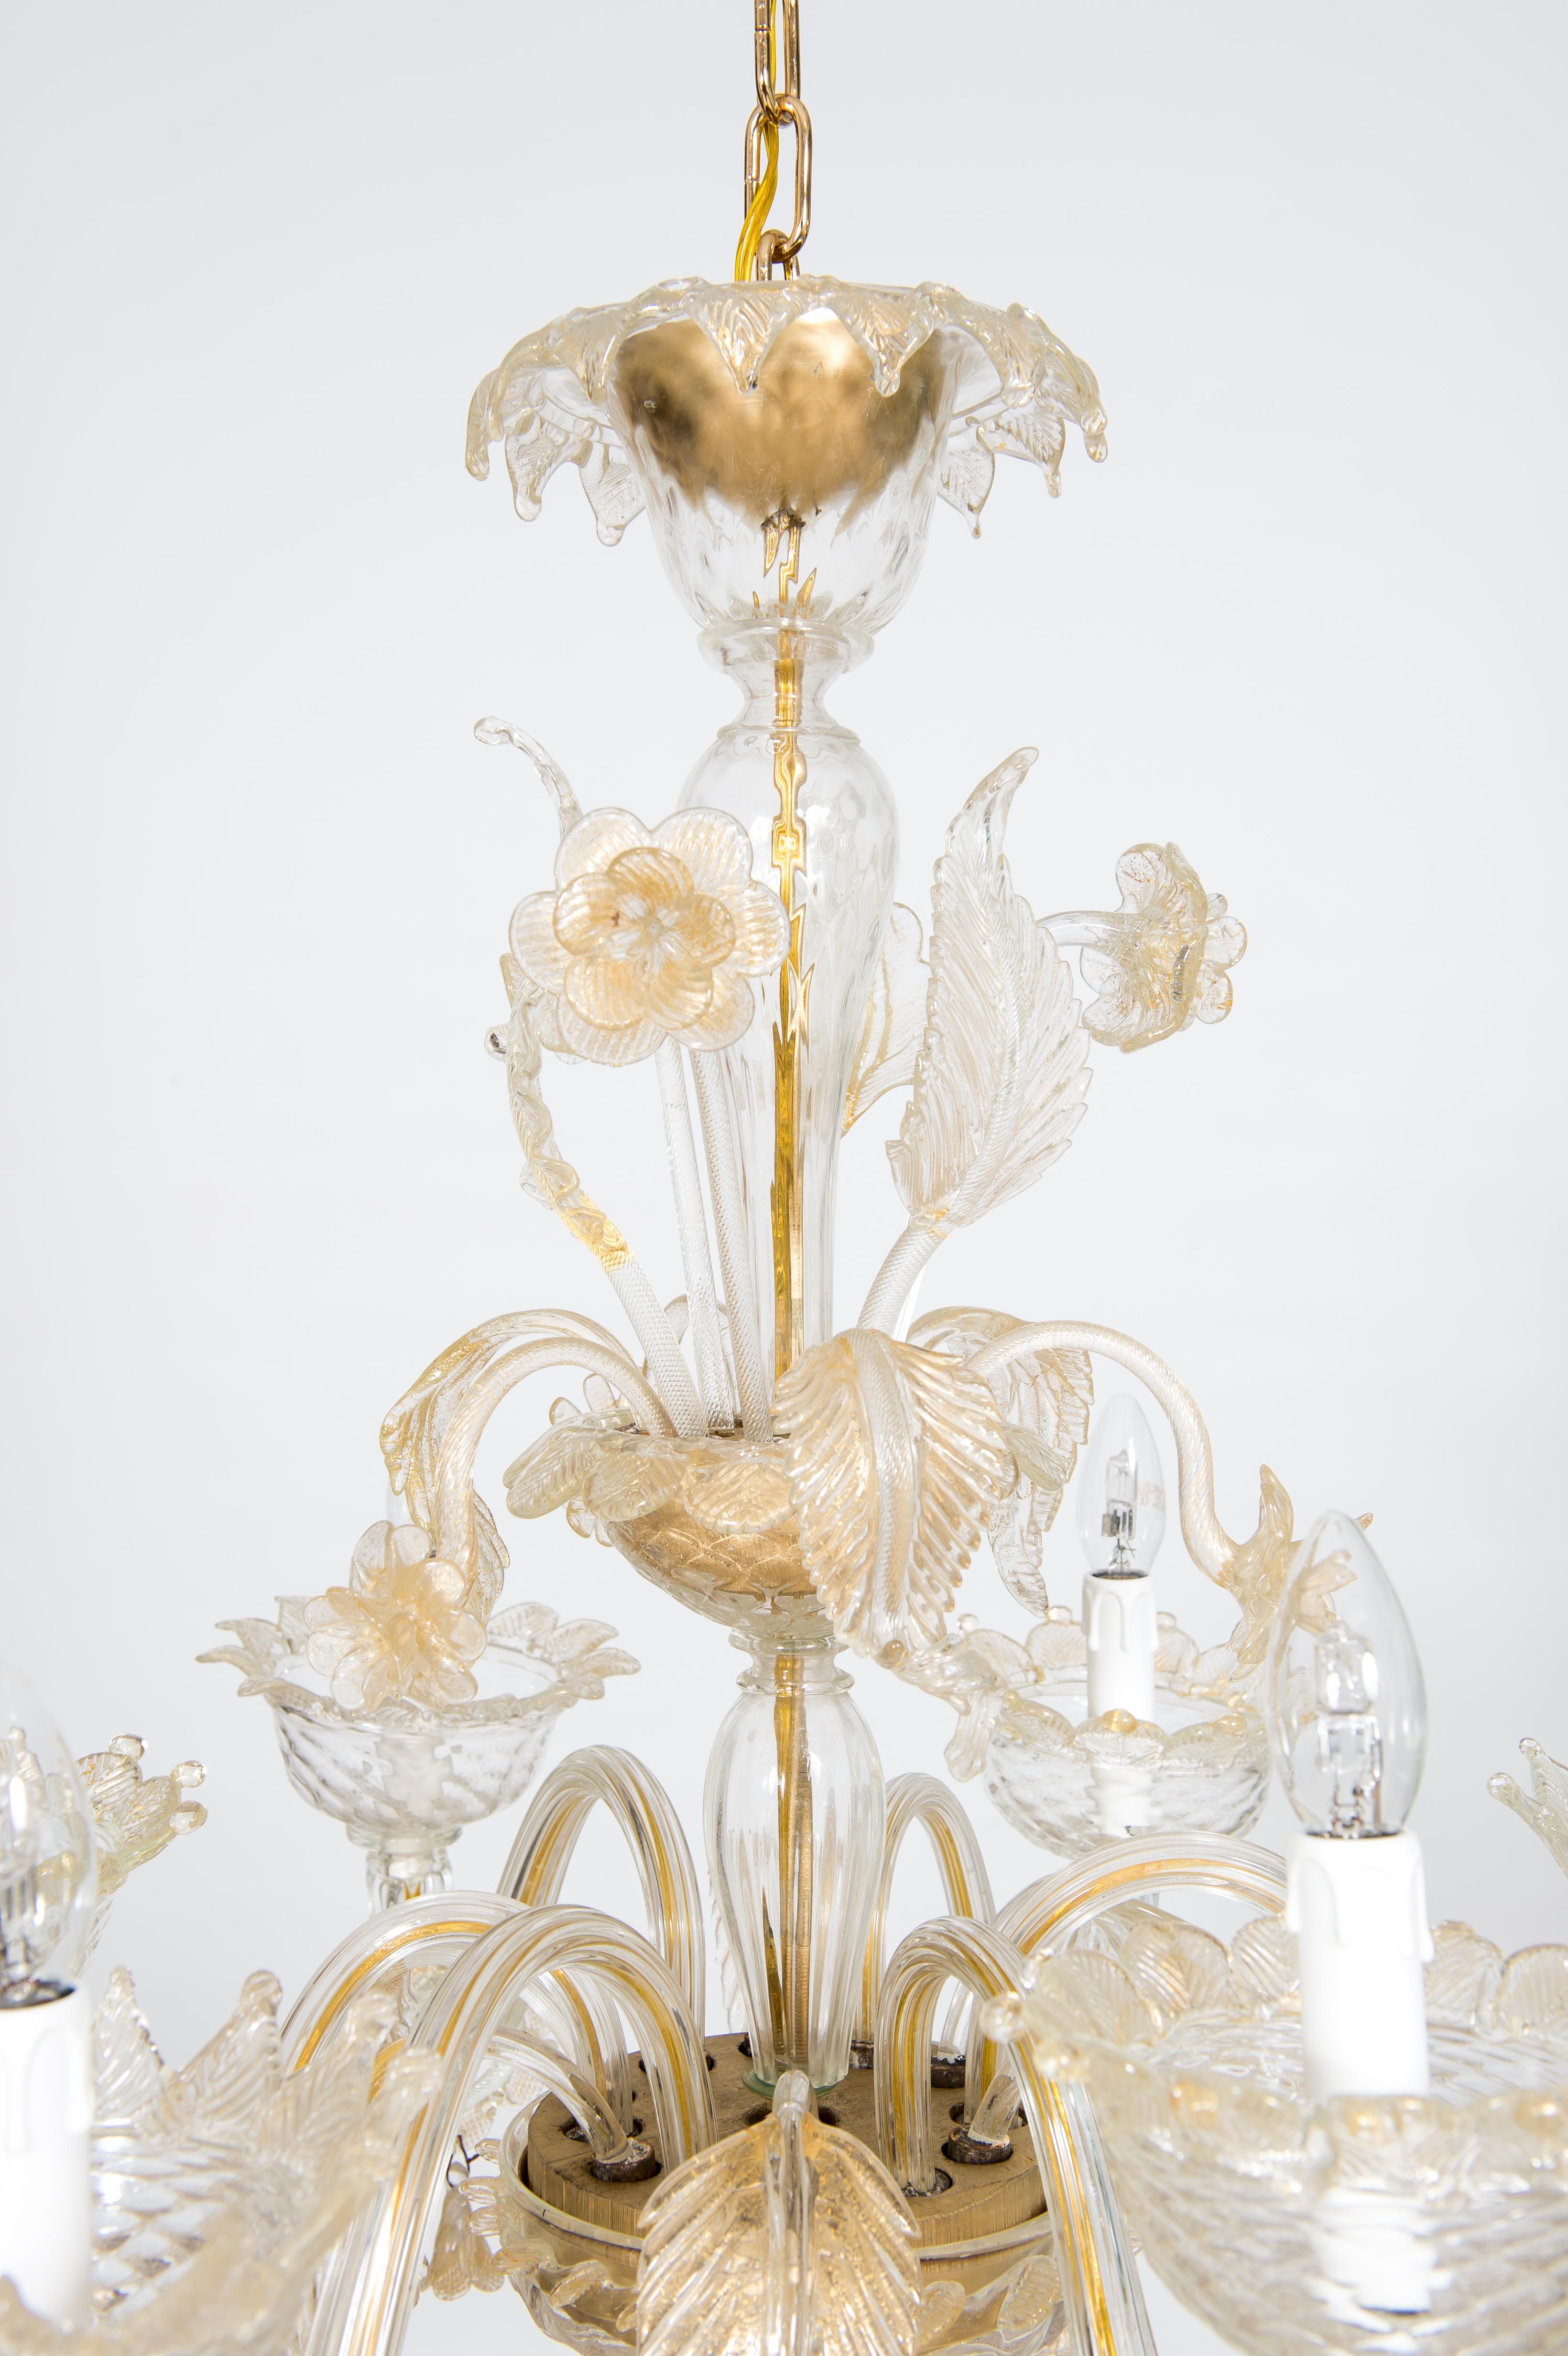 Golden Murano Glass Chandelier with “Vere” Decorations, 20th Century, Italy For Sale 3